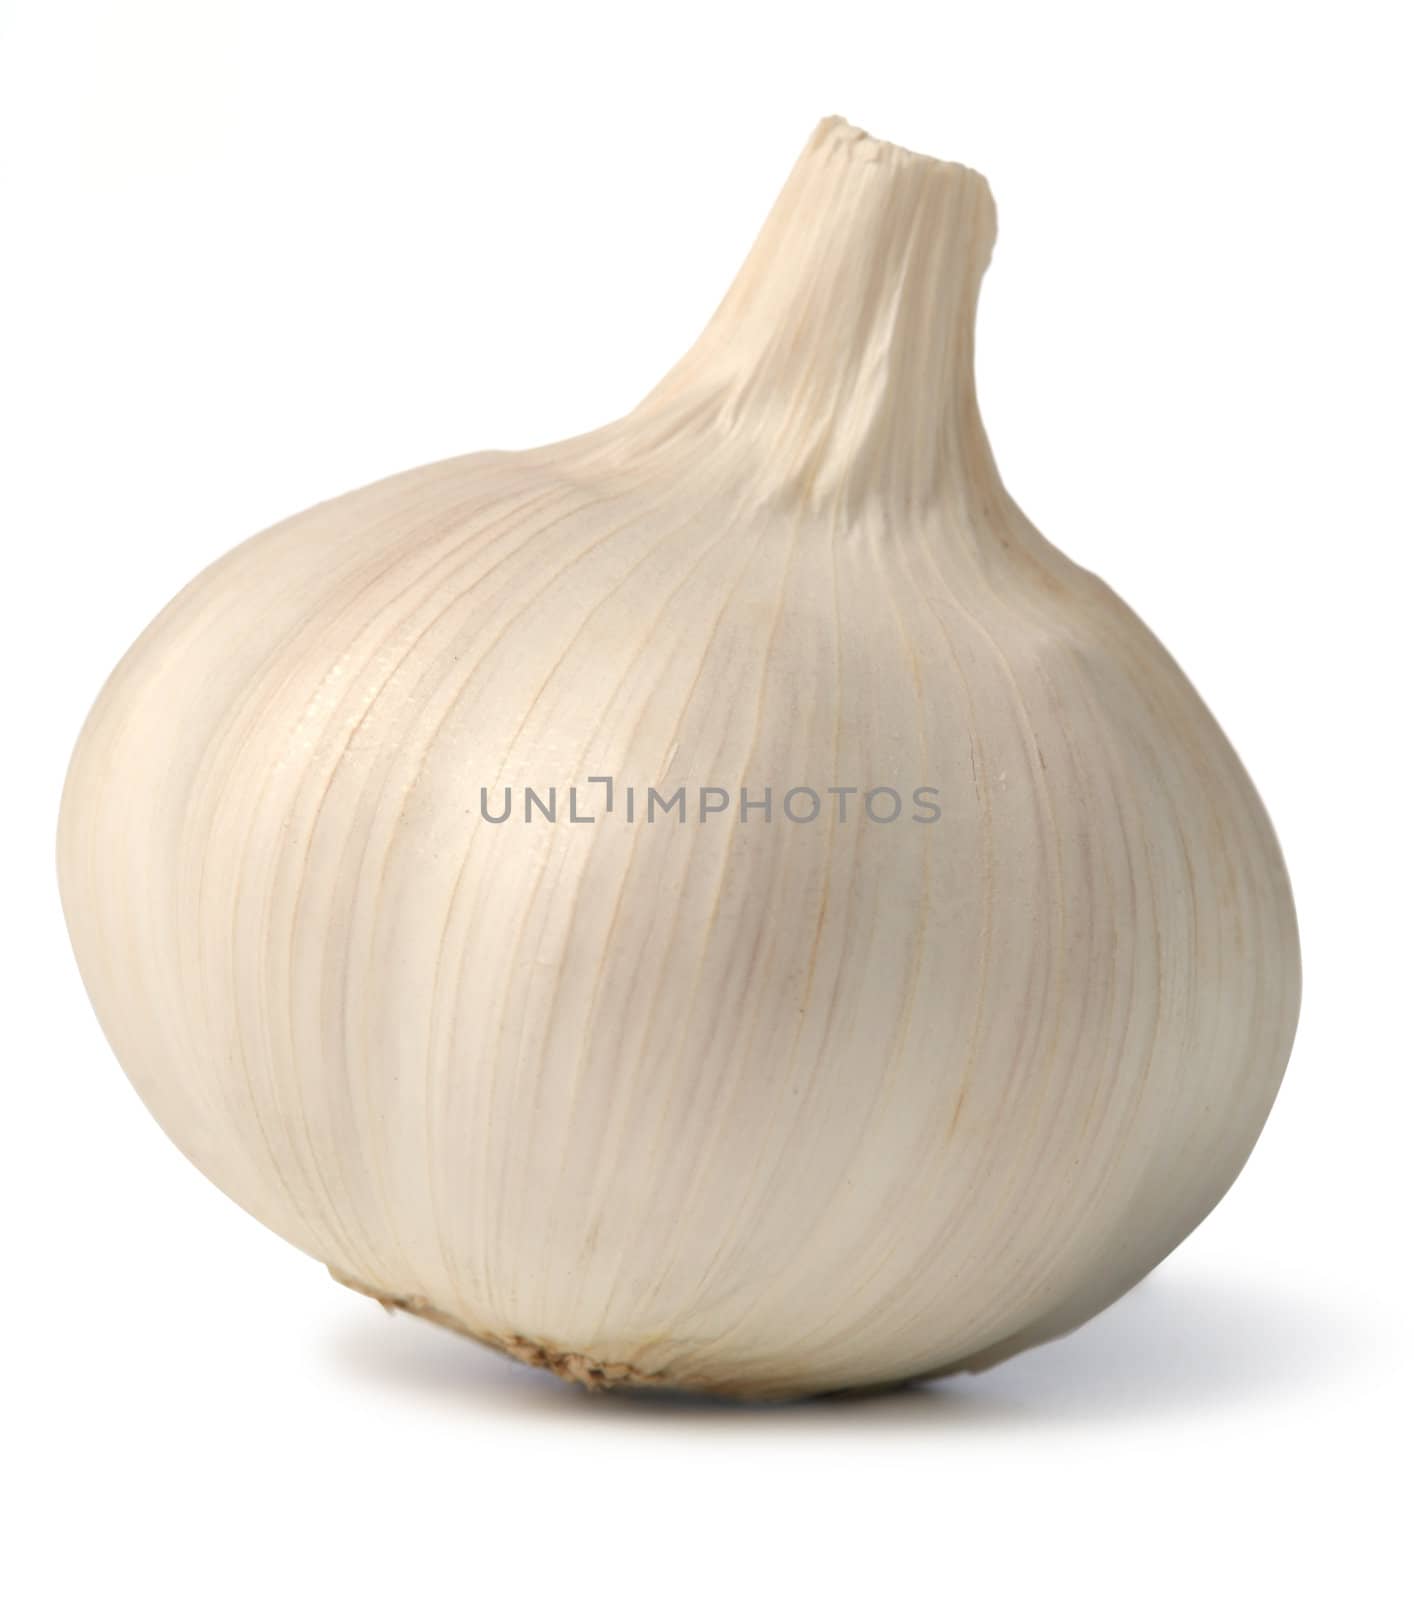 Garlic. A head of garlic isolated on a white background